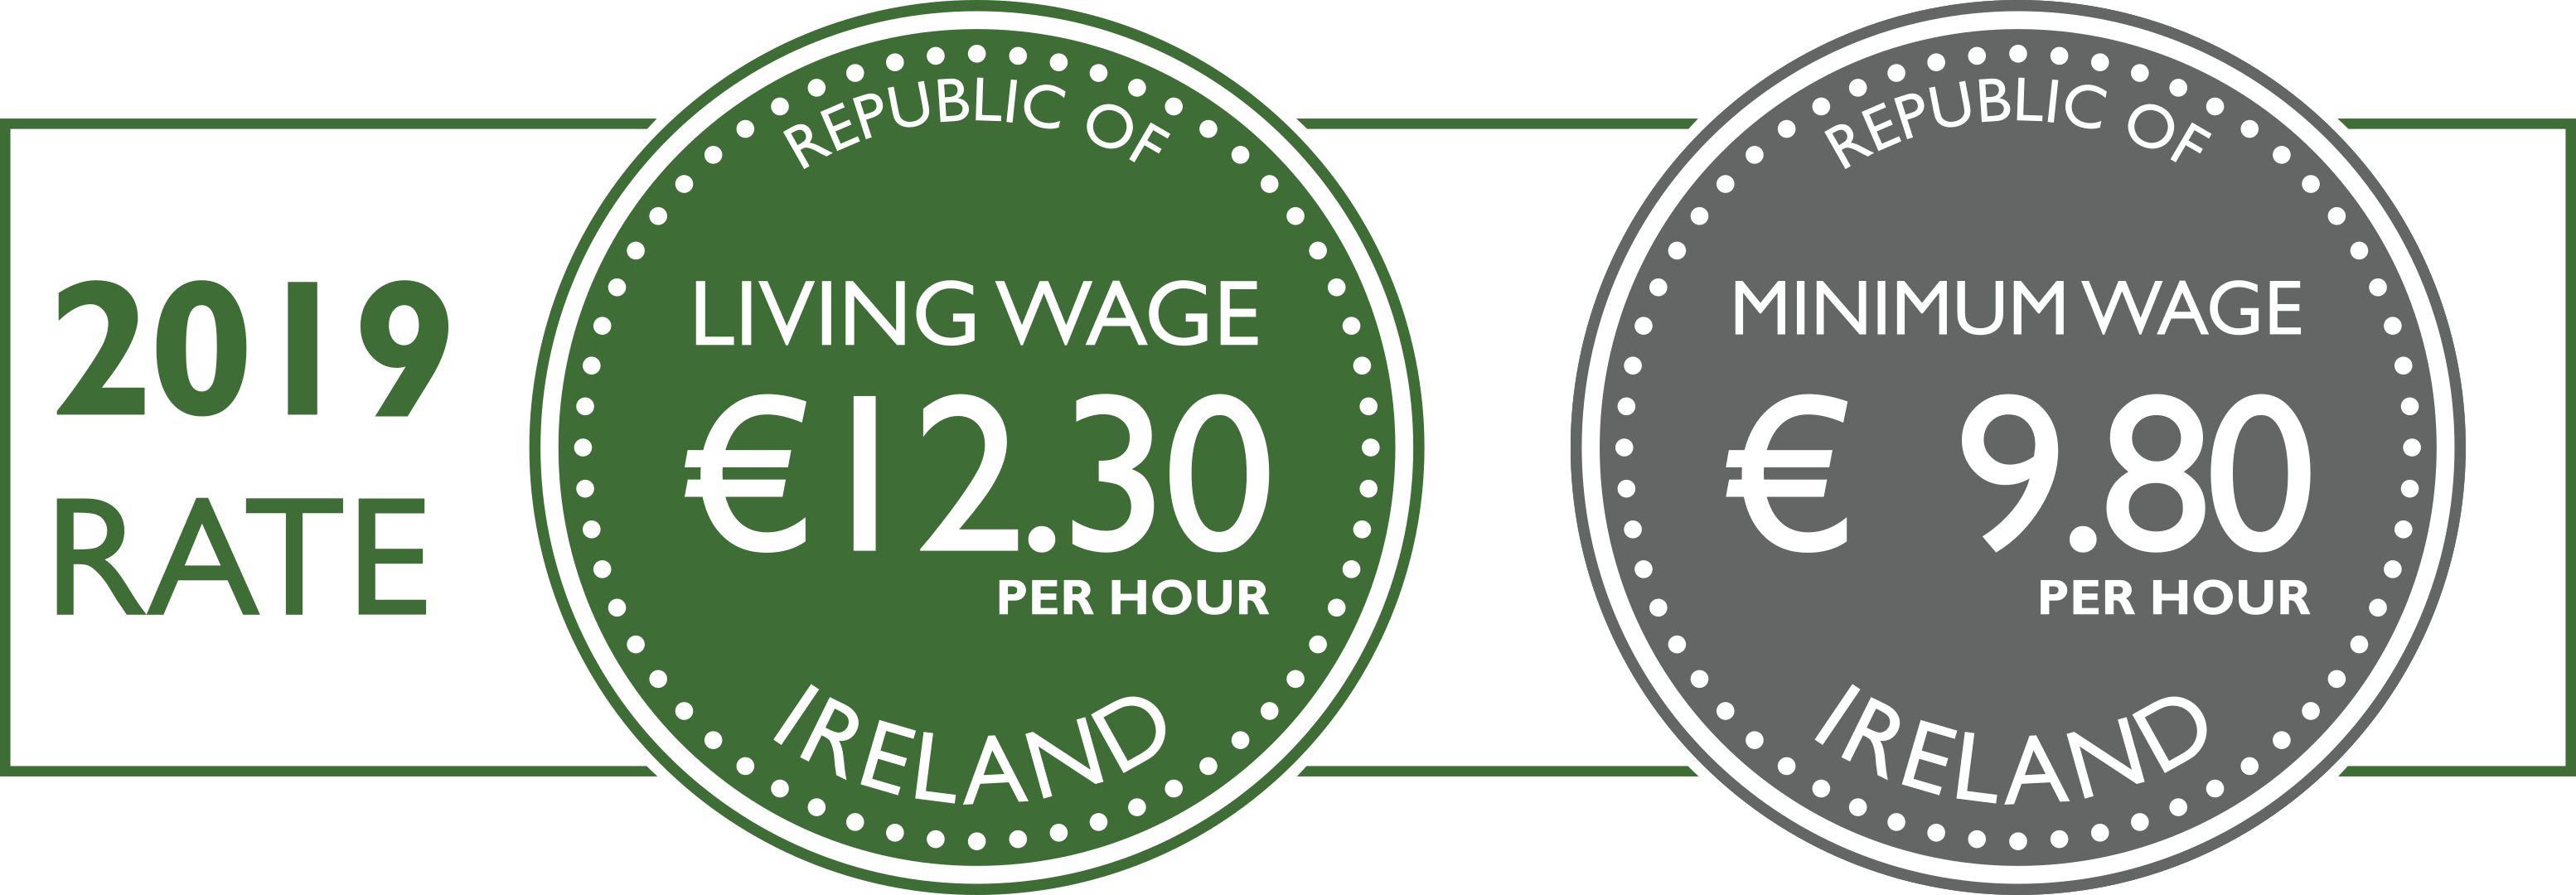 The living wage rate is now €12.30 an hour, well above the official statutory minimum wage €9.80.